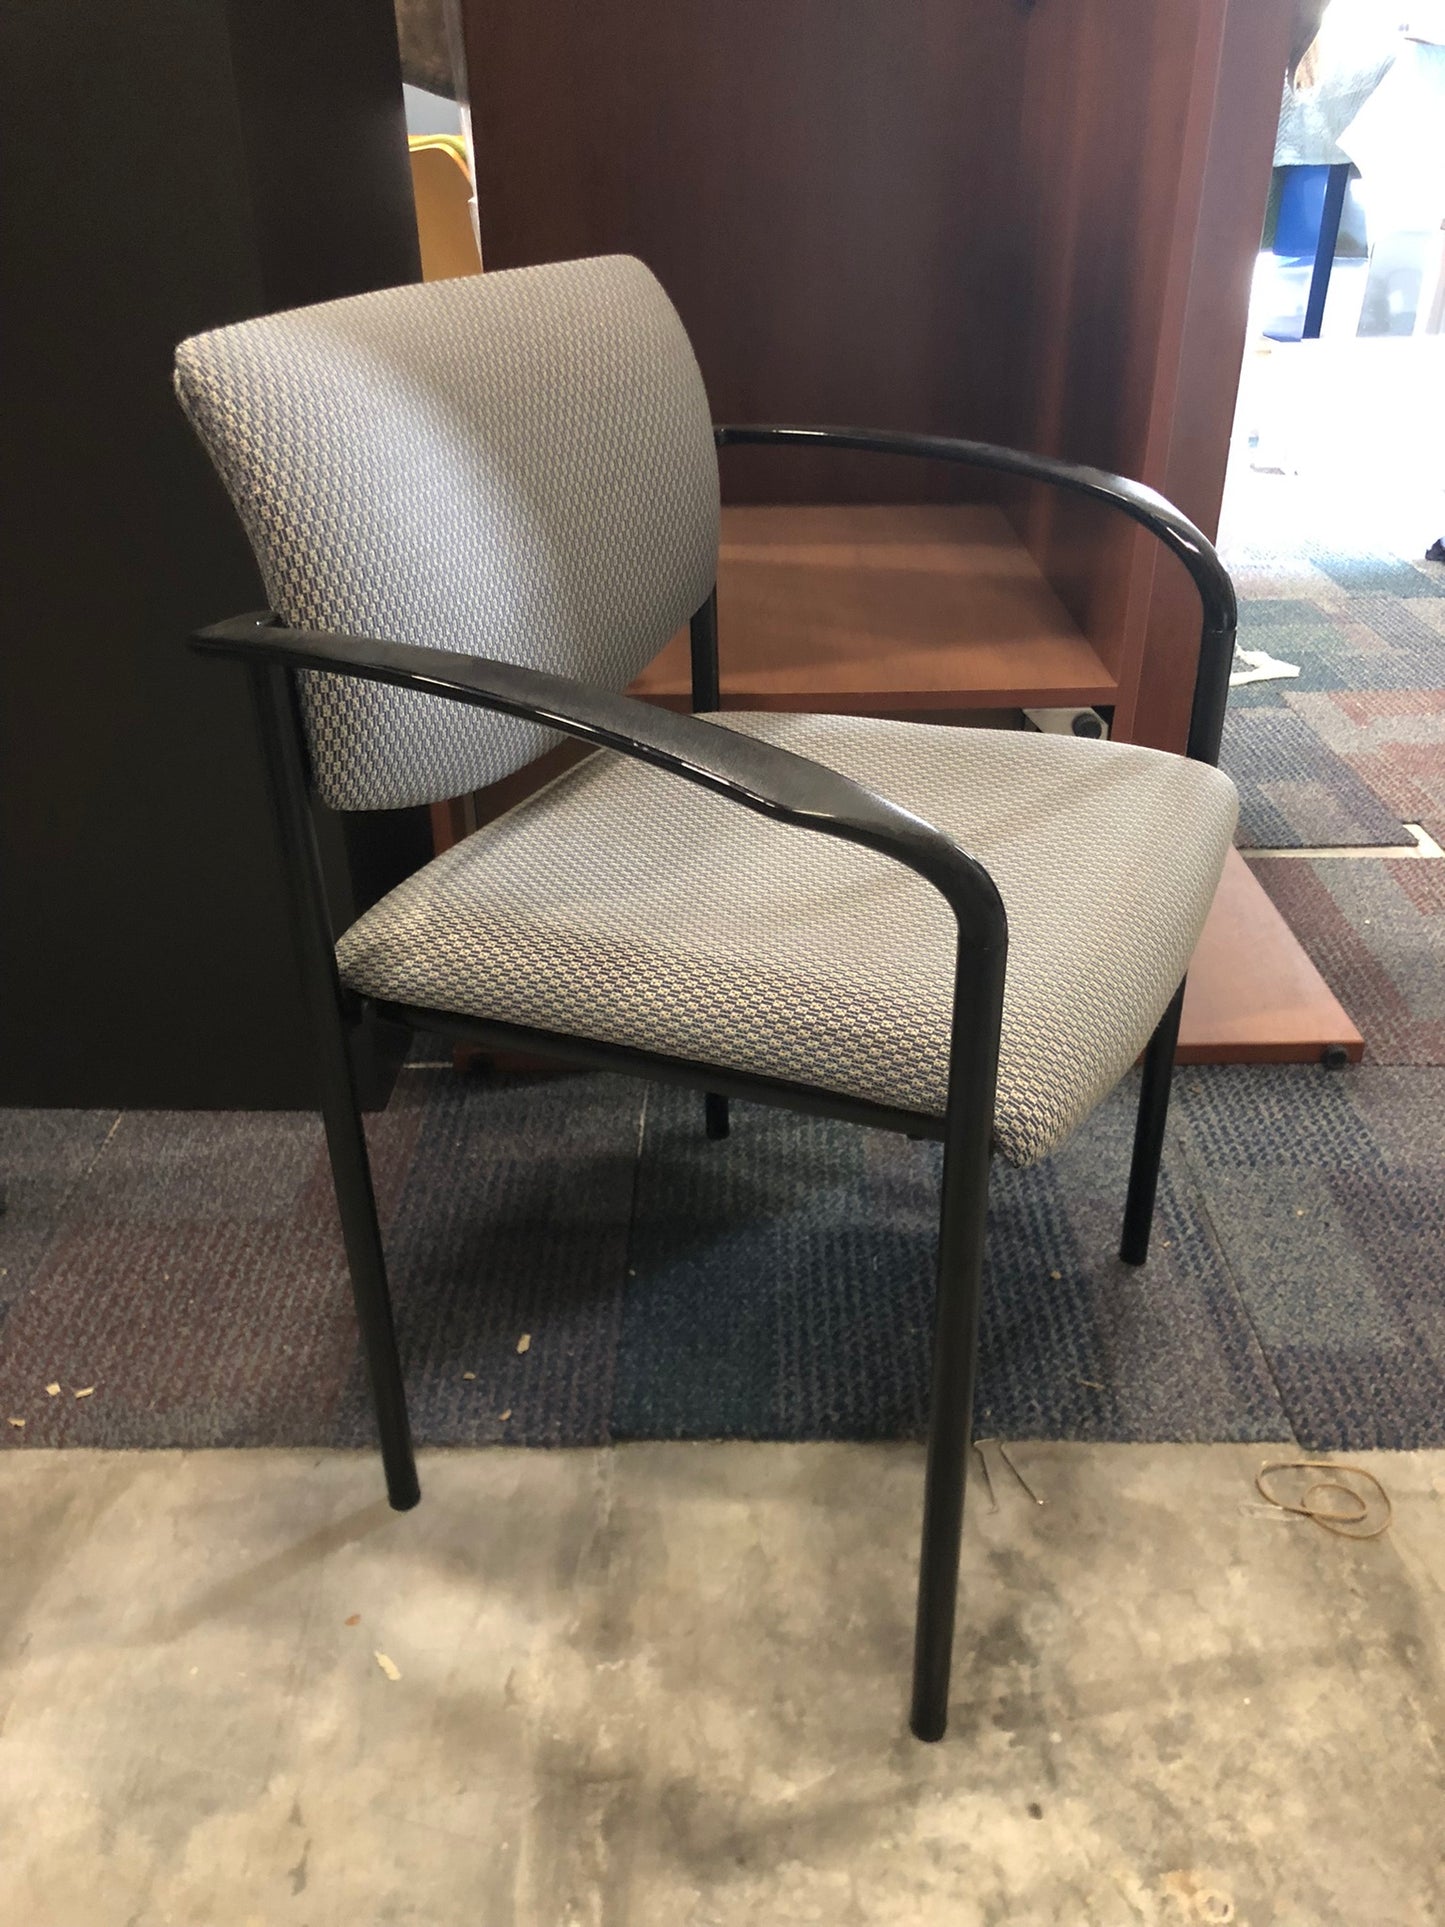 STEELCASE PLAYER STACK CHAIR